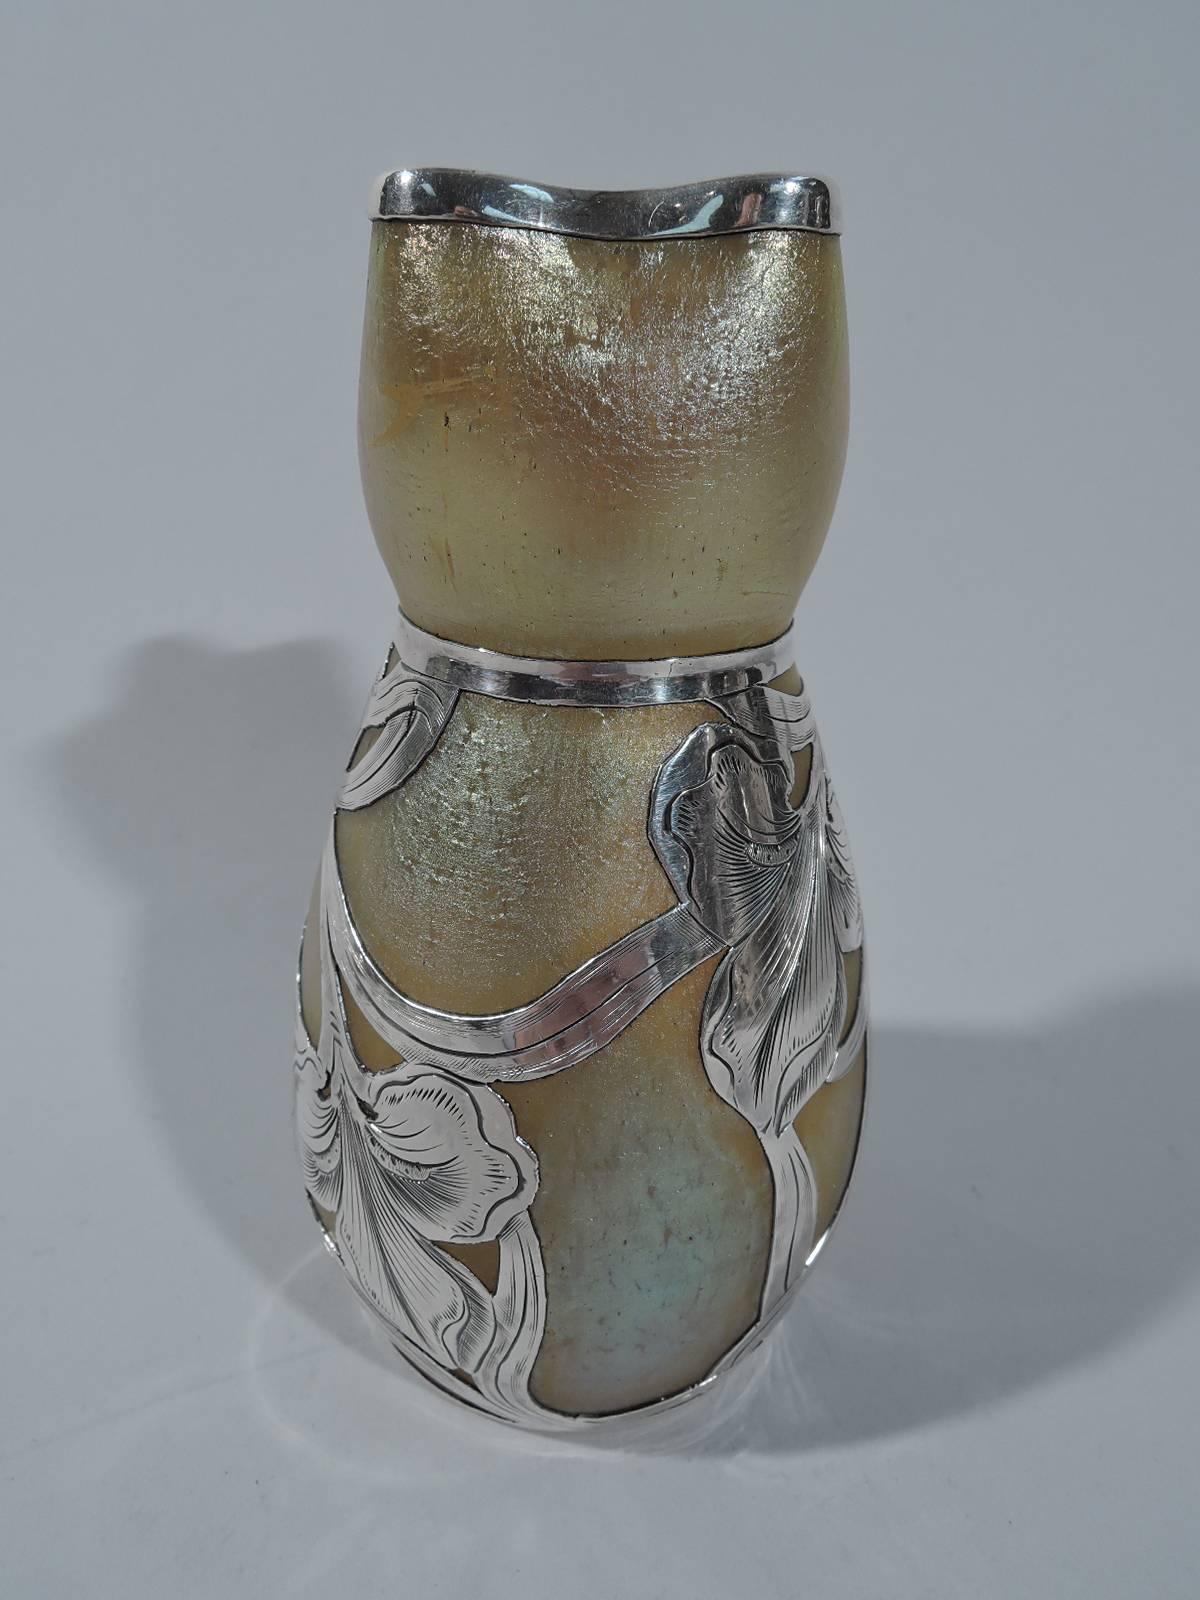 Art Nouveau iridescent glass vase with silver overlay. Made by Alvin in Providence, circa 1900. Oval body with curved neck and crimped quatrefoil mouth. Glass is shimmering gold. Overlaid silver flowers climb and wraparound the body. They are joined